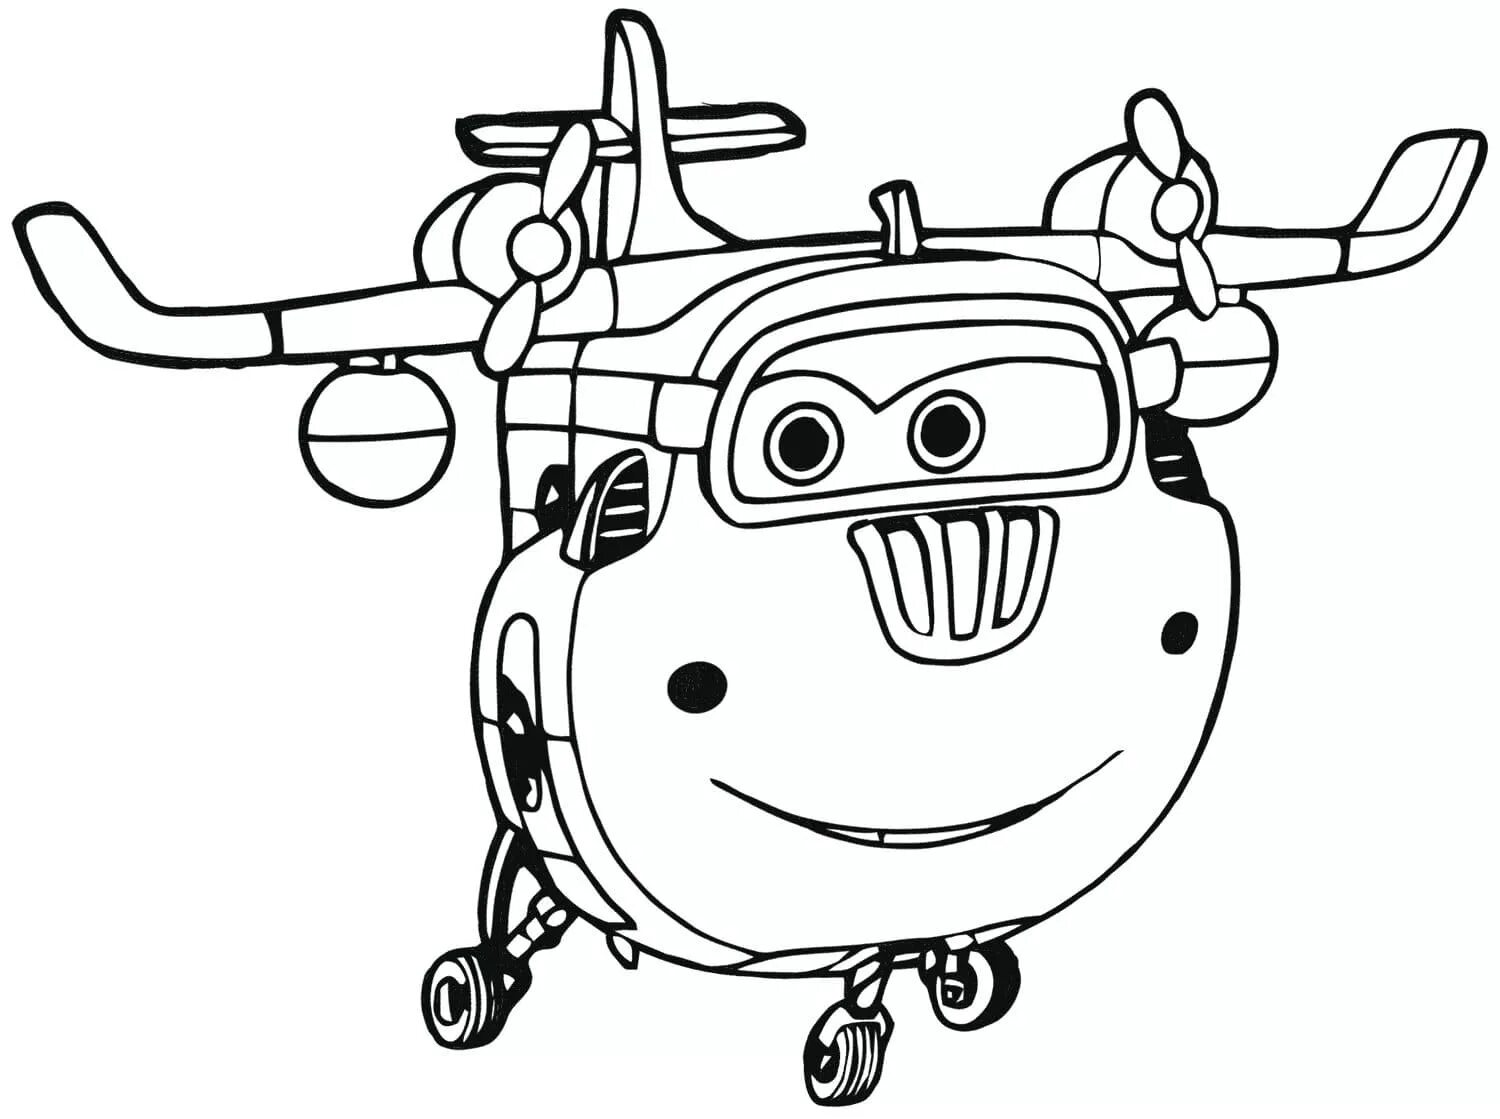 Cool donny super wings coloring page